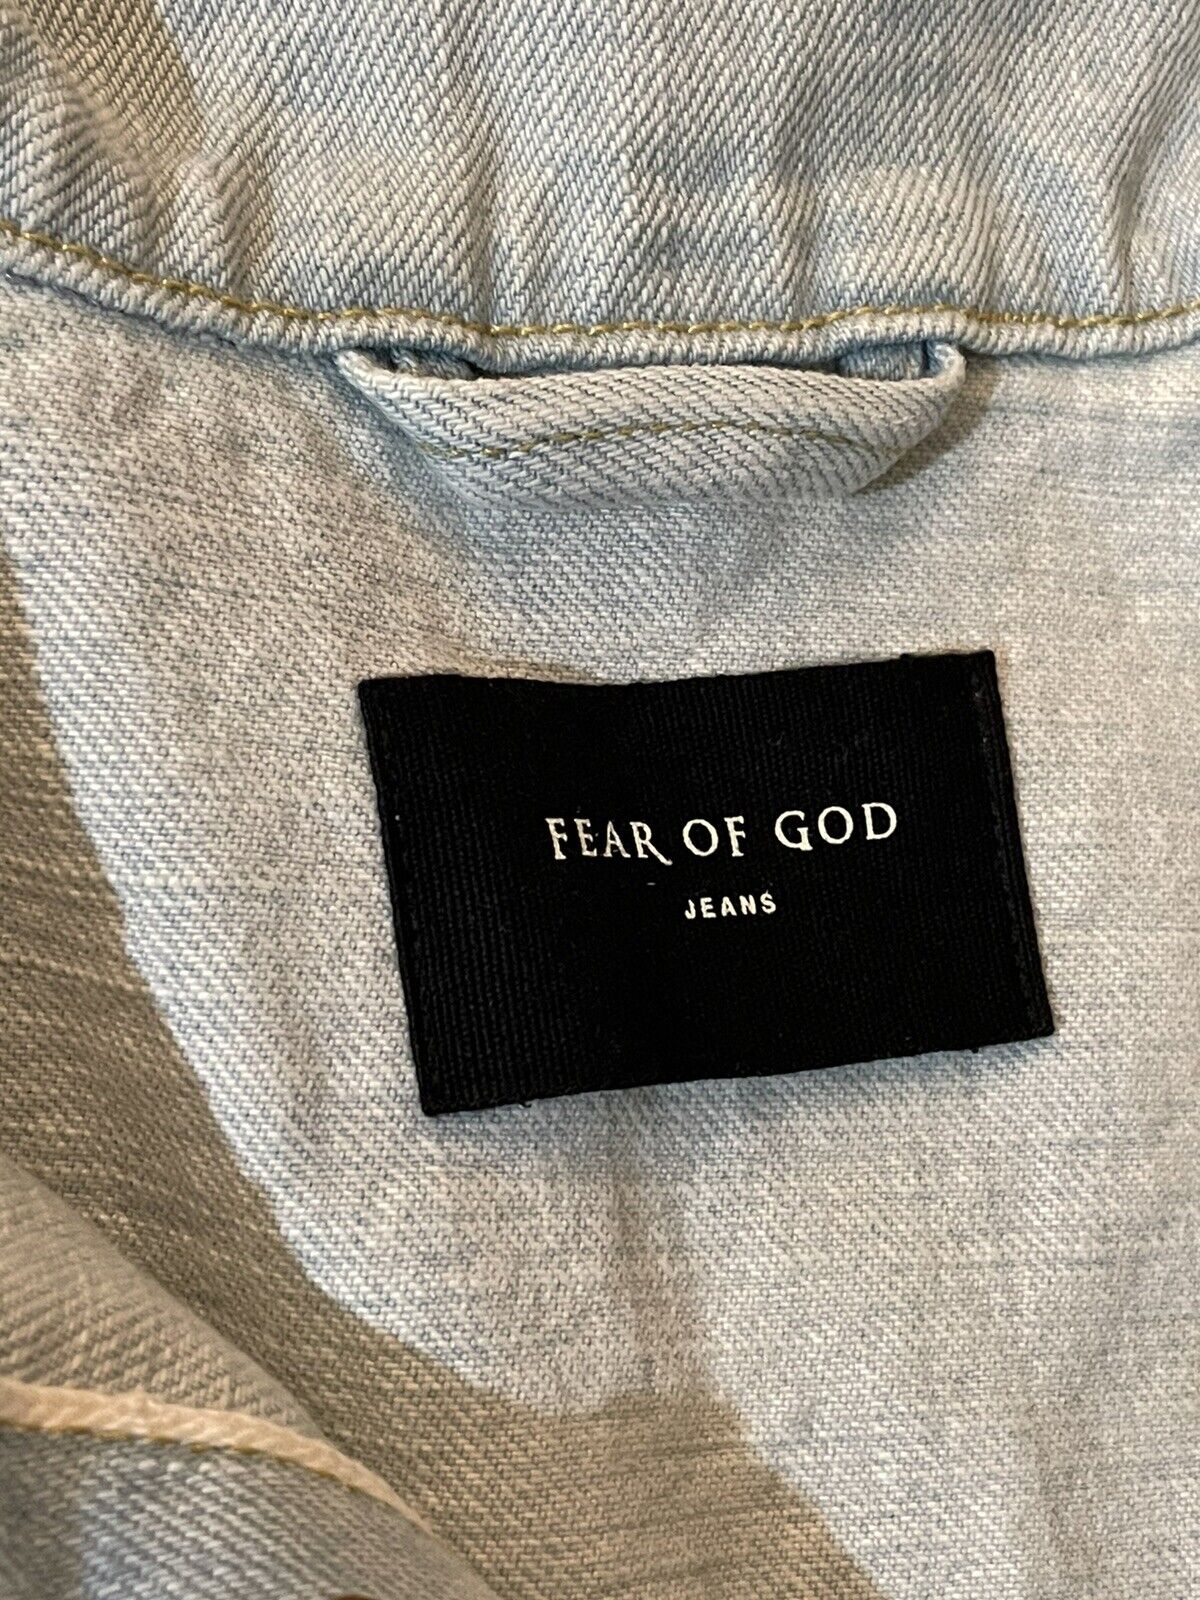 fear of god fifth Seventh collection denim trucker jacket selvedge Large